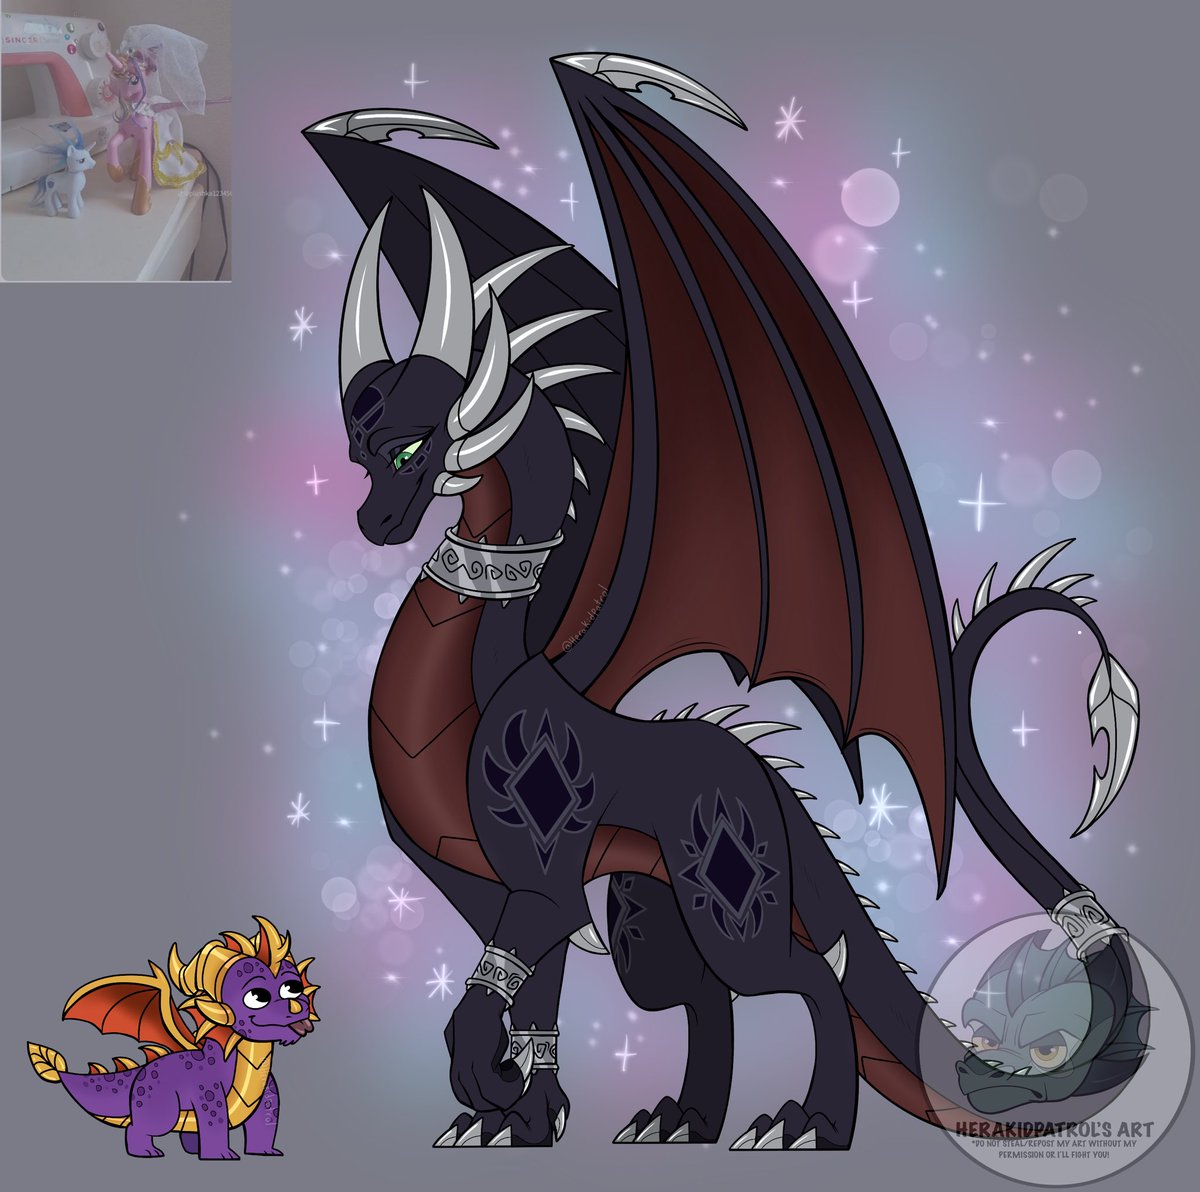 Dragoness and the tiny ass Dragon

#TLoS #Spyro #Cynder